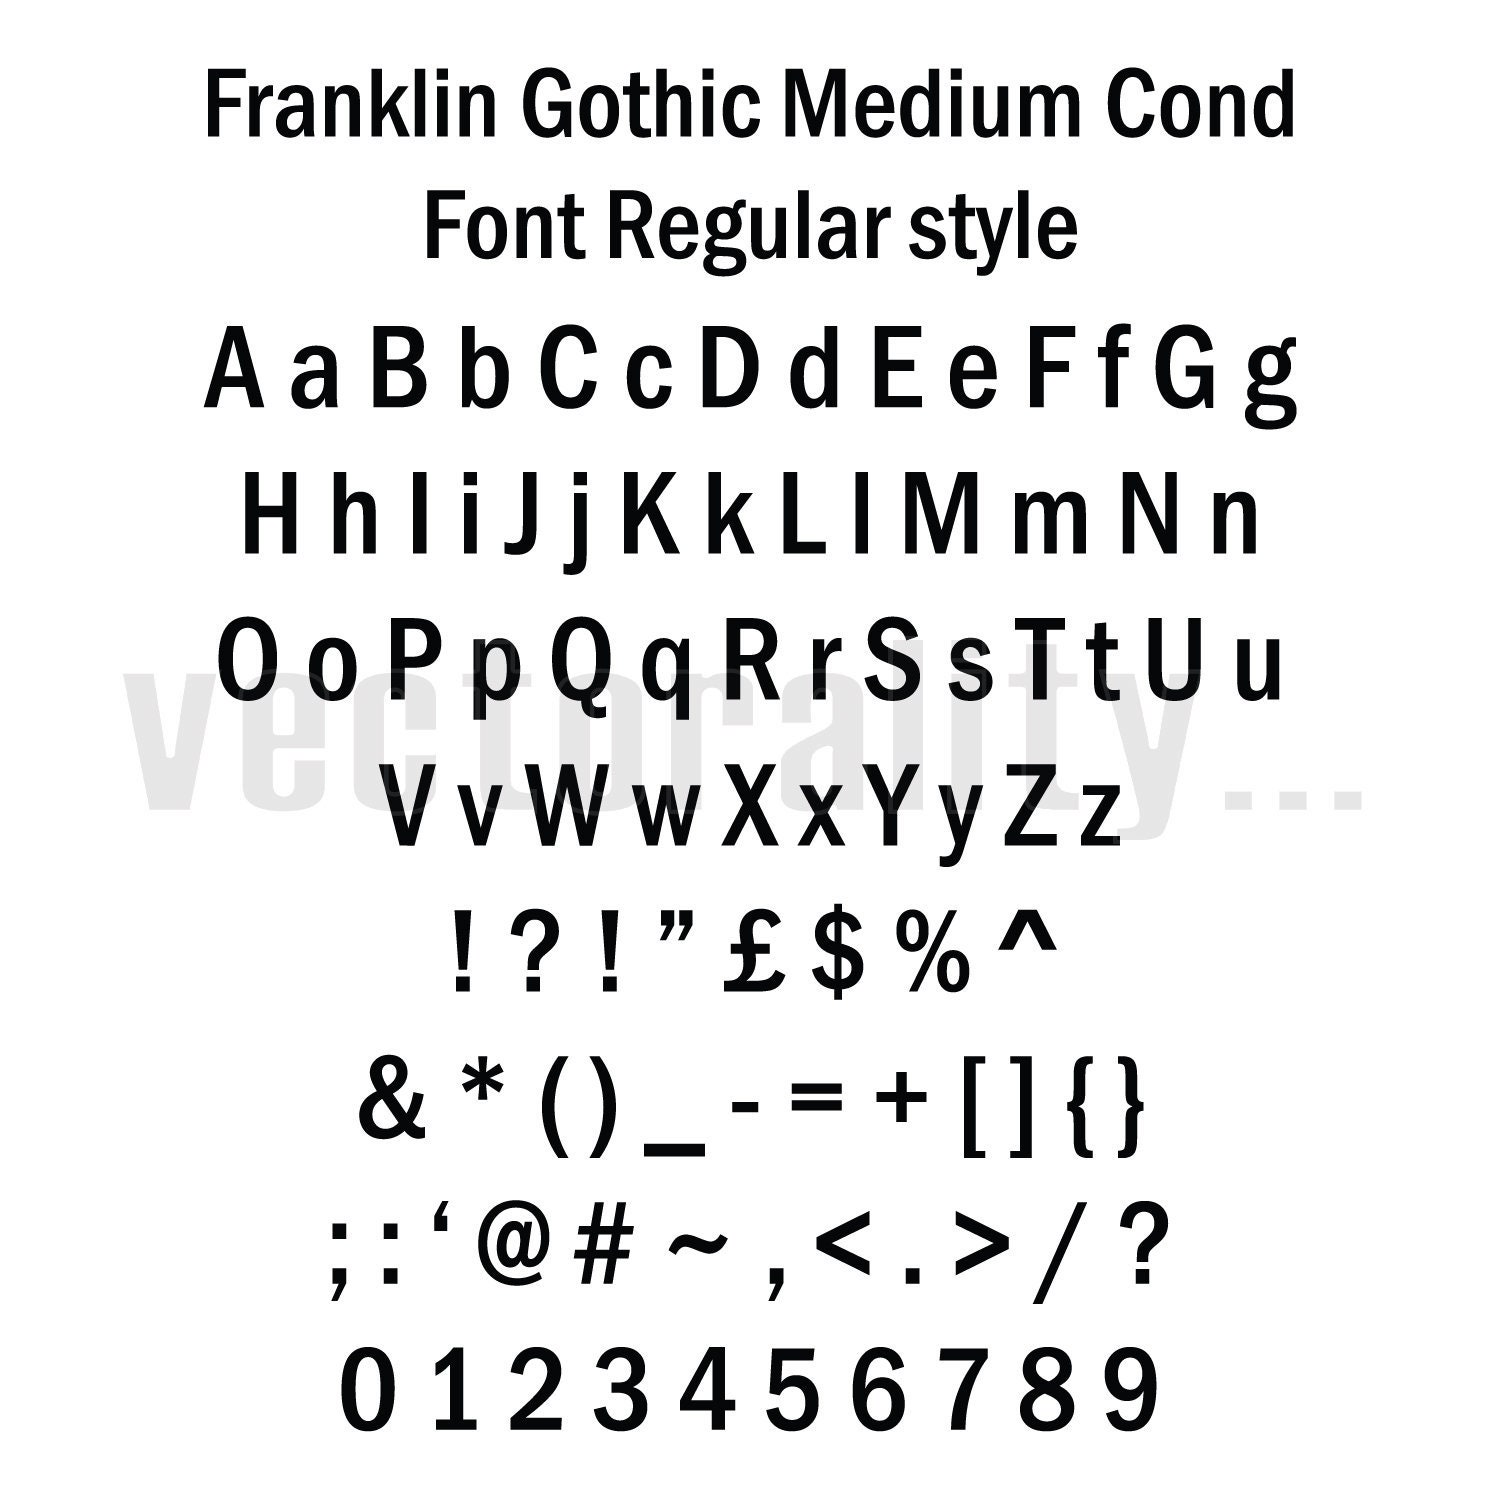 Franklin Gothic шрифт. Franklin Gothic Medium шрифт. Шрифт Franklin Gothic алфавит. Franklin Gothic Heavy. Din cond шрифт